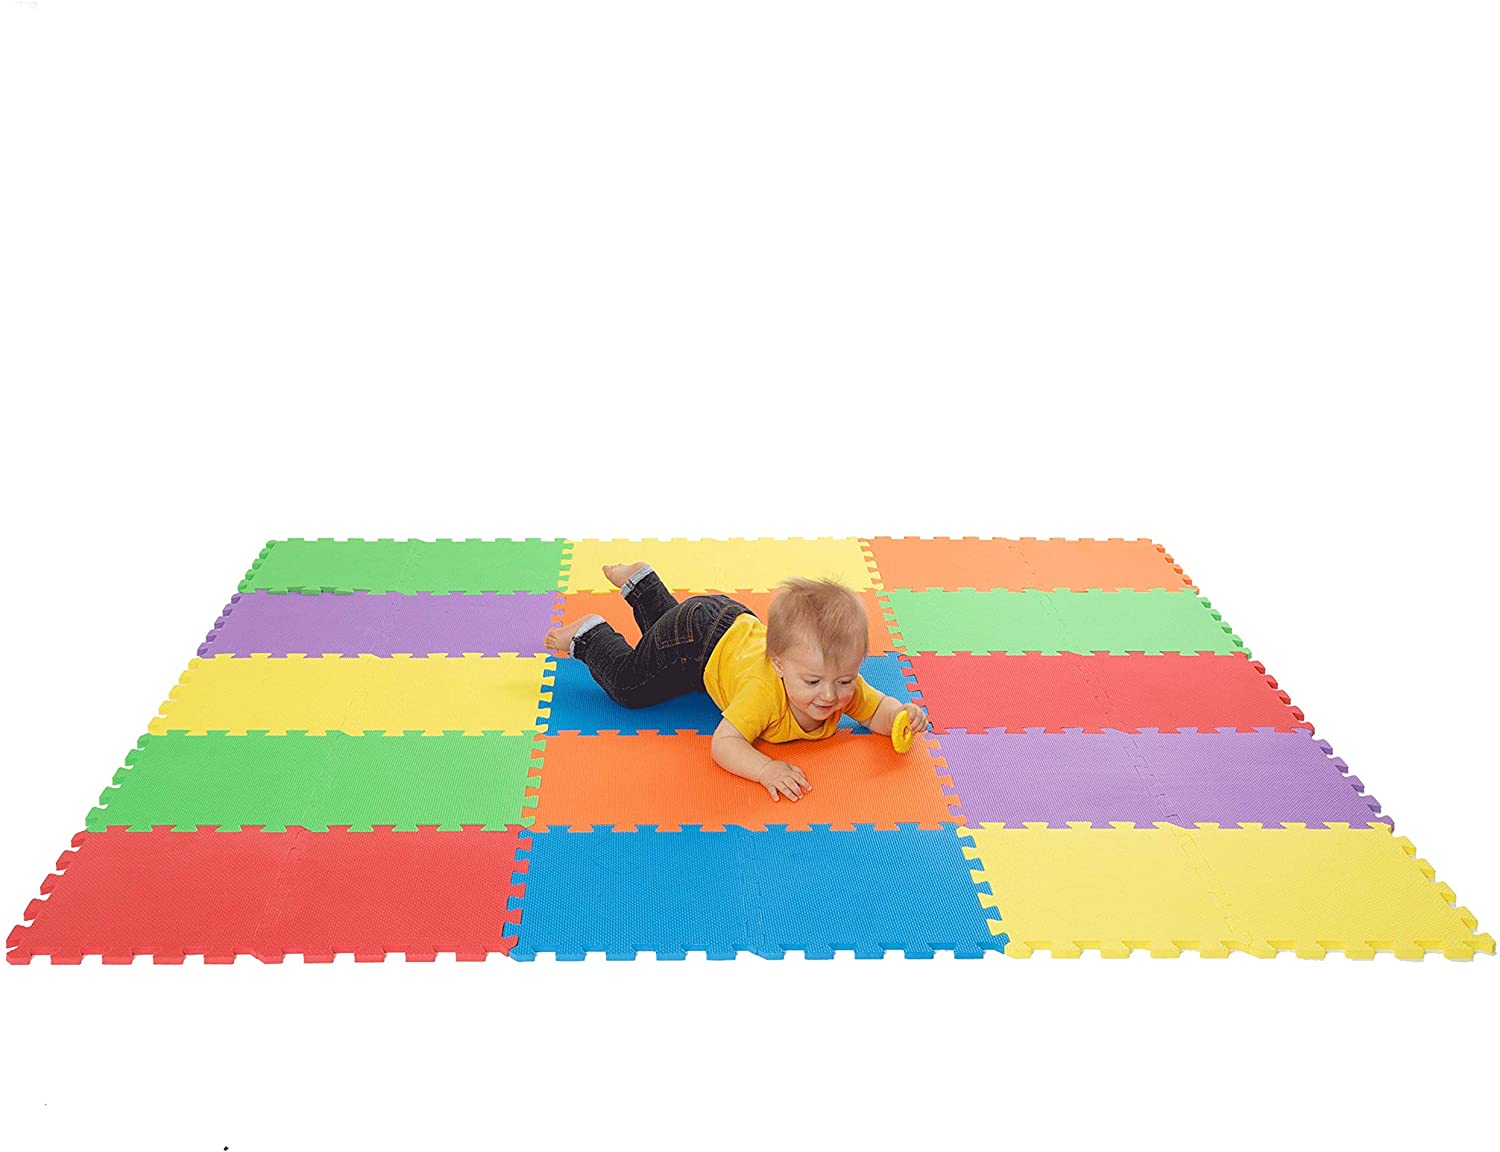 Non-Toxic Foam Puzzle Floor Mat, Comfortable, Extra Thick, Cushiony  Exercise and Play Mat for Toddlers, Kids & Adults, 16 Tiles (12x12)